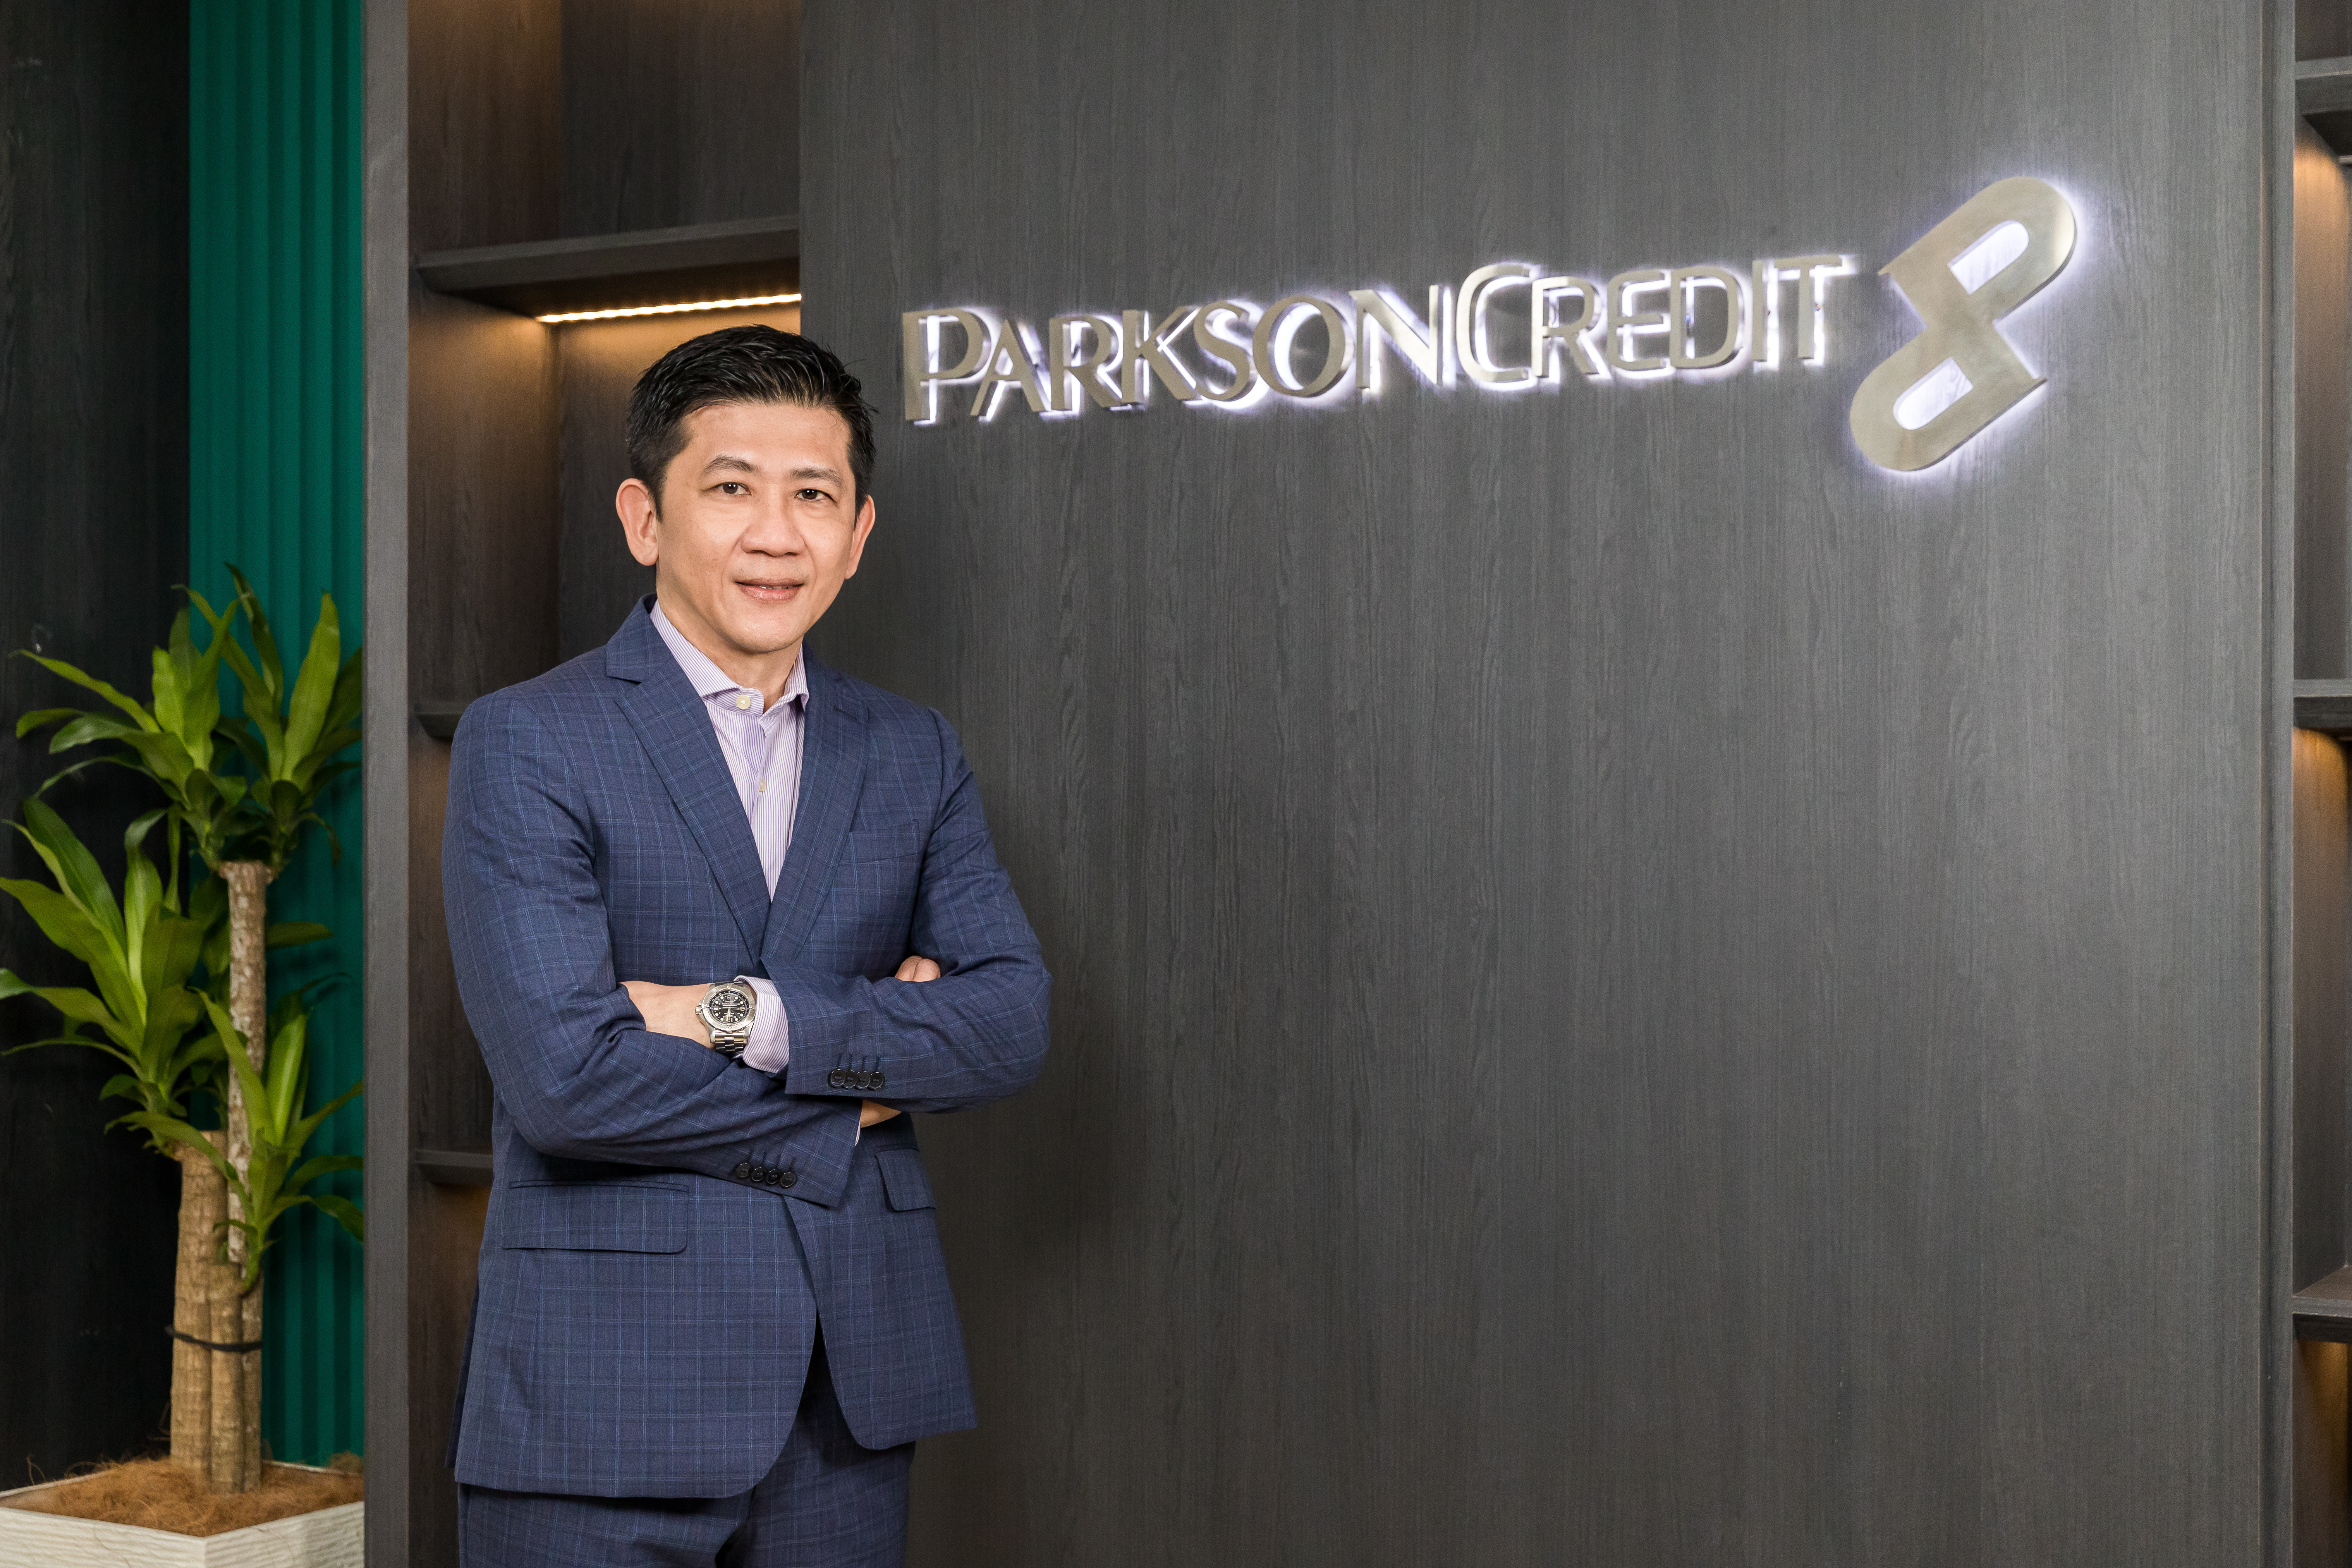 Parkson Credit Corporate Overview